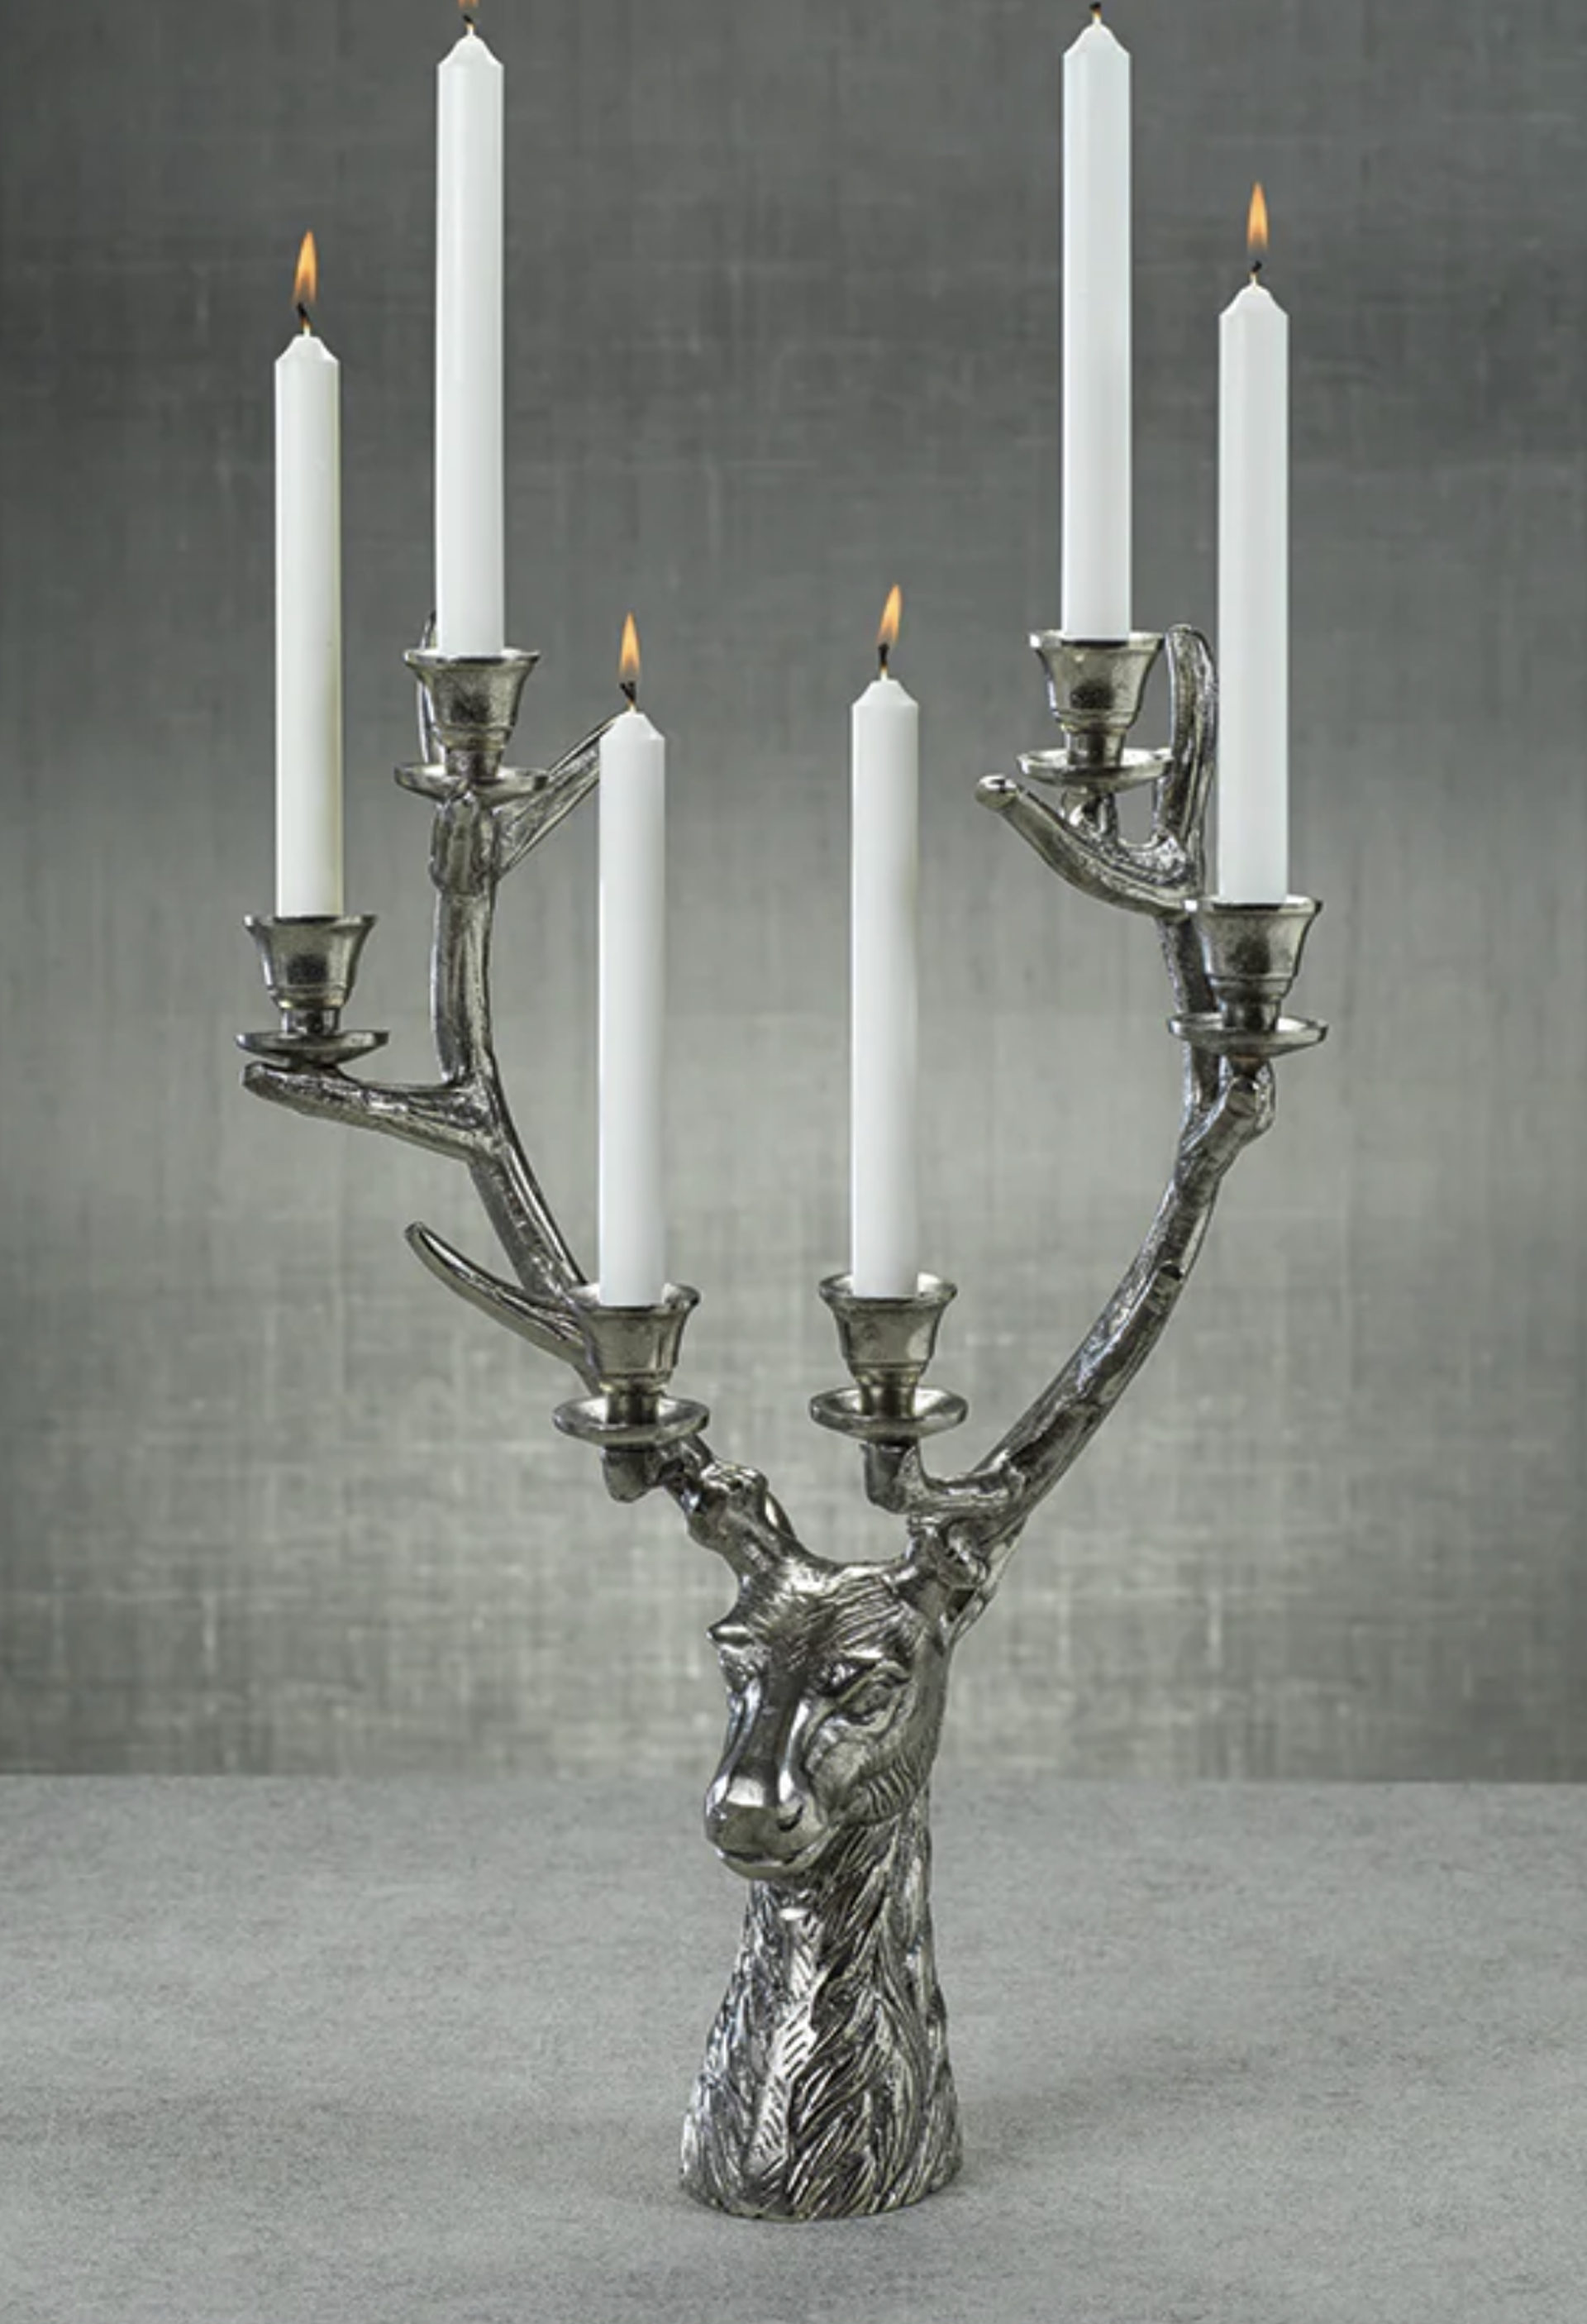 Stag Head 6-Tier Candleholder - Large by Argent